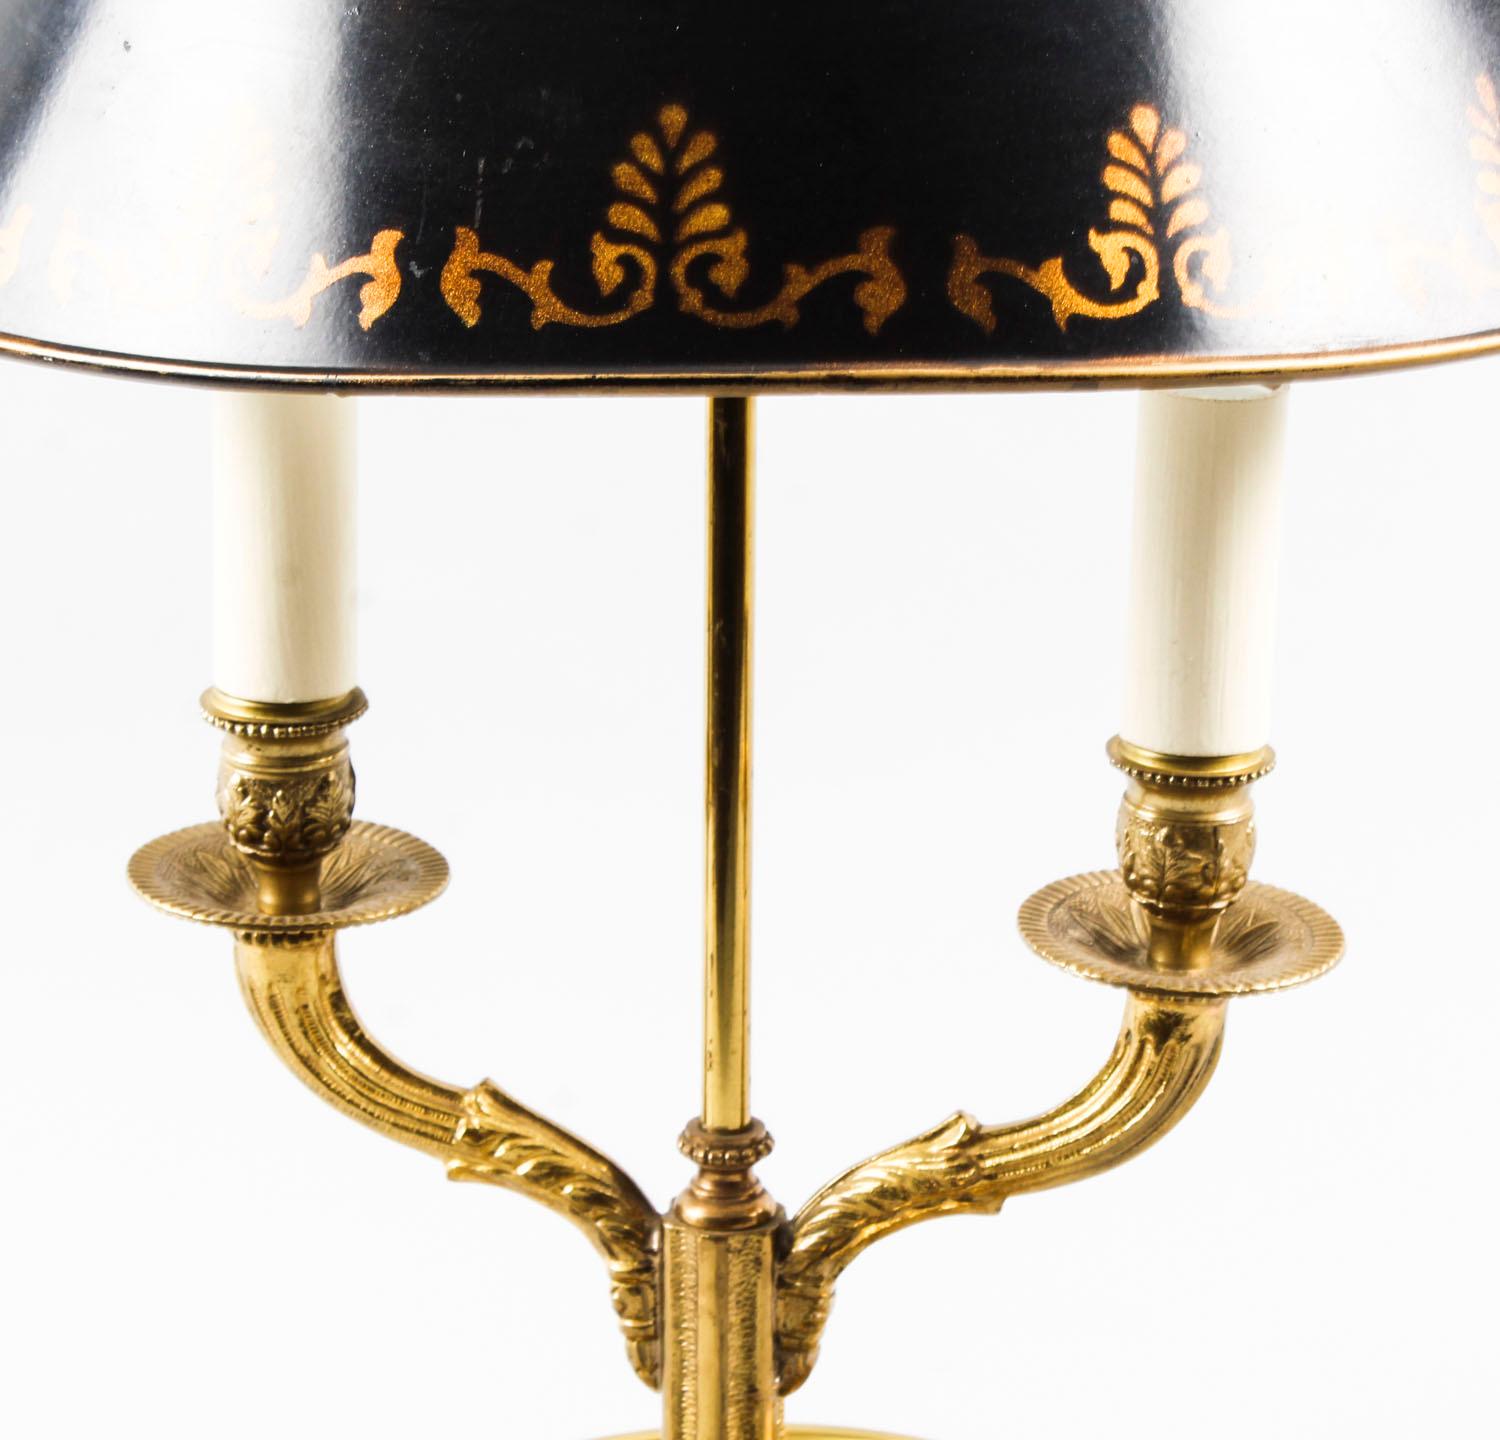 This is a beautiful French bouillotte lamp in ormolu and toleware, circa 1950 in date.

The lamp features a black tôle shade with gold highlights. The base, which would hold the Bouillotte game pieces, is finely chased while the two arms rise out